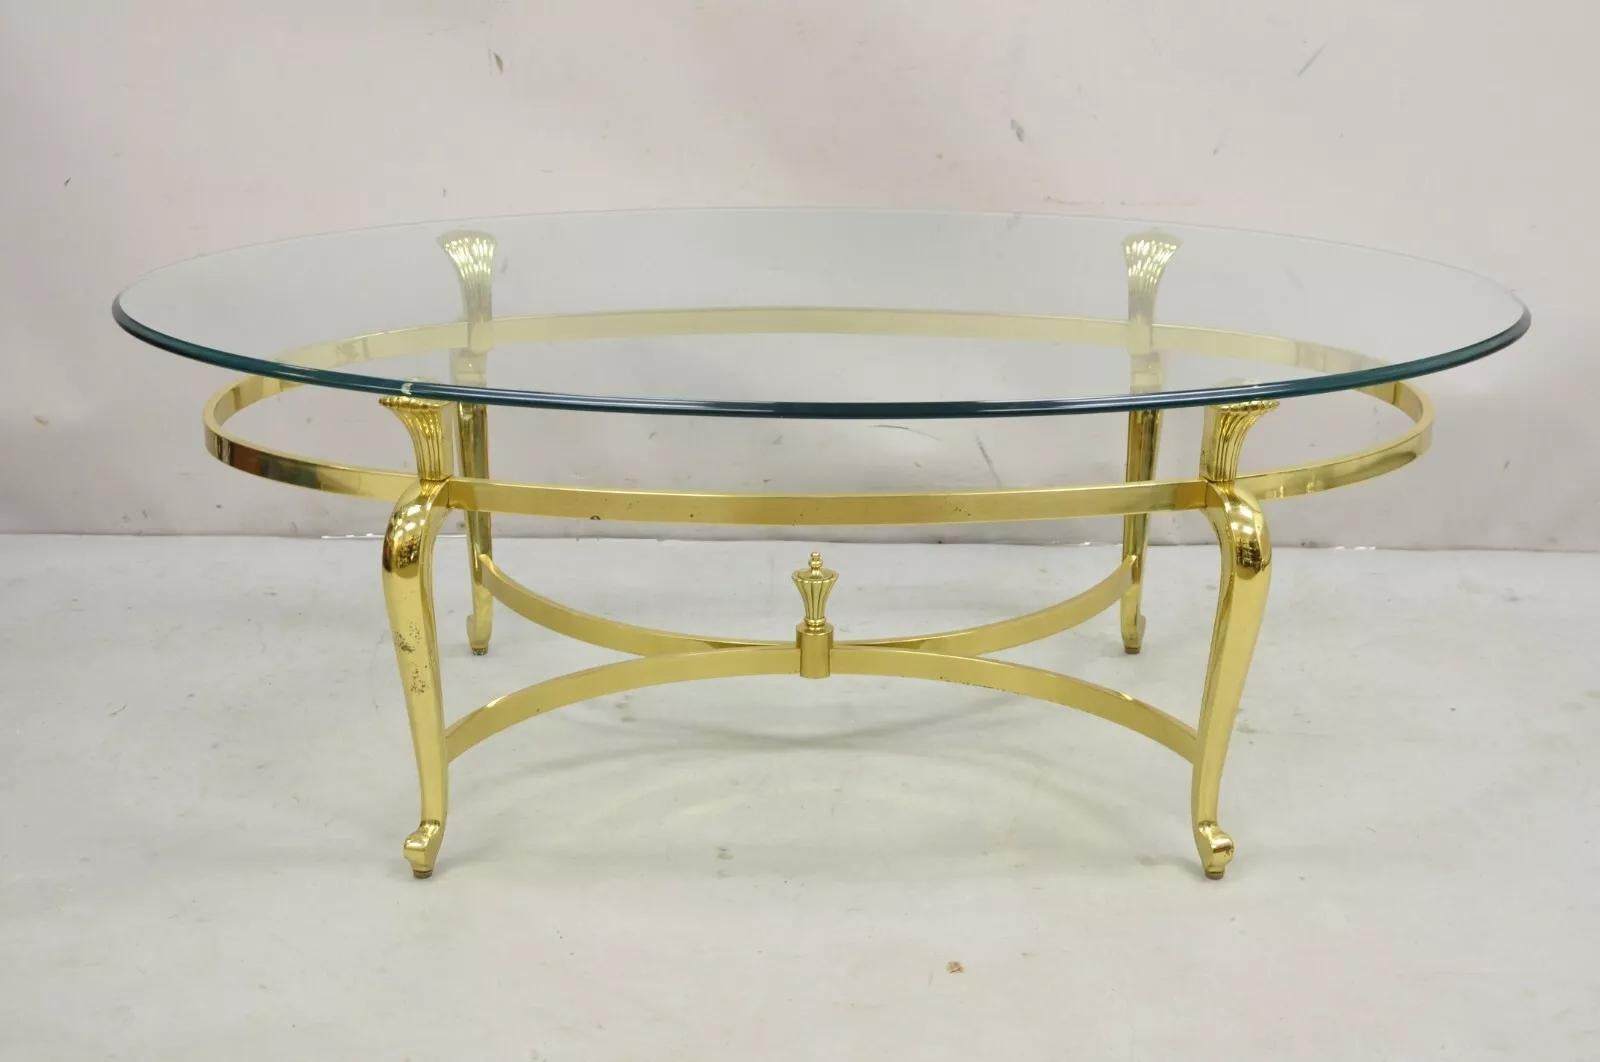 Vintage Brass Hollywood Regency Oval Glass Top Cabriole Leg Coffee Table. Circa Late 20th Century. Measurements: 17.5